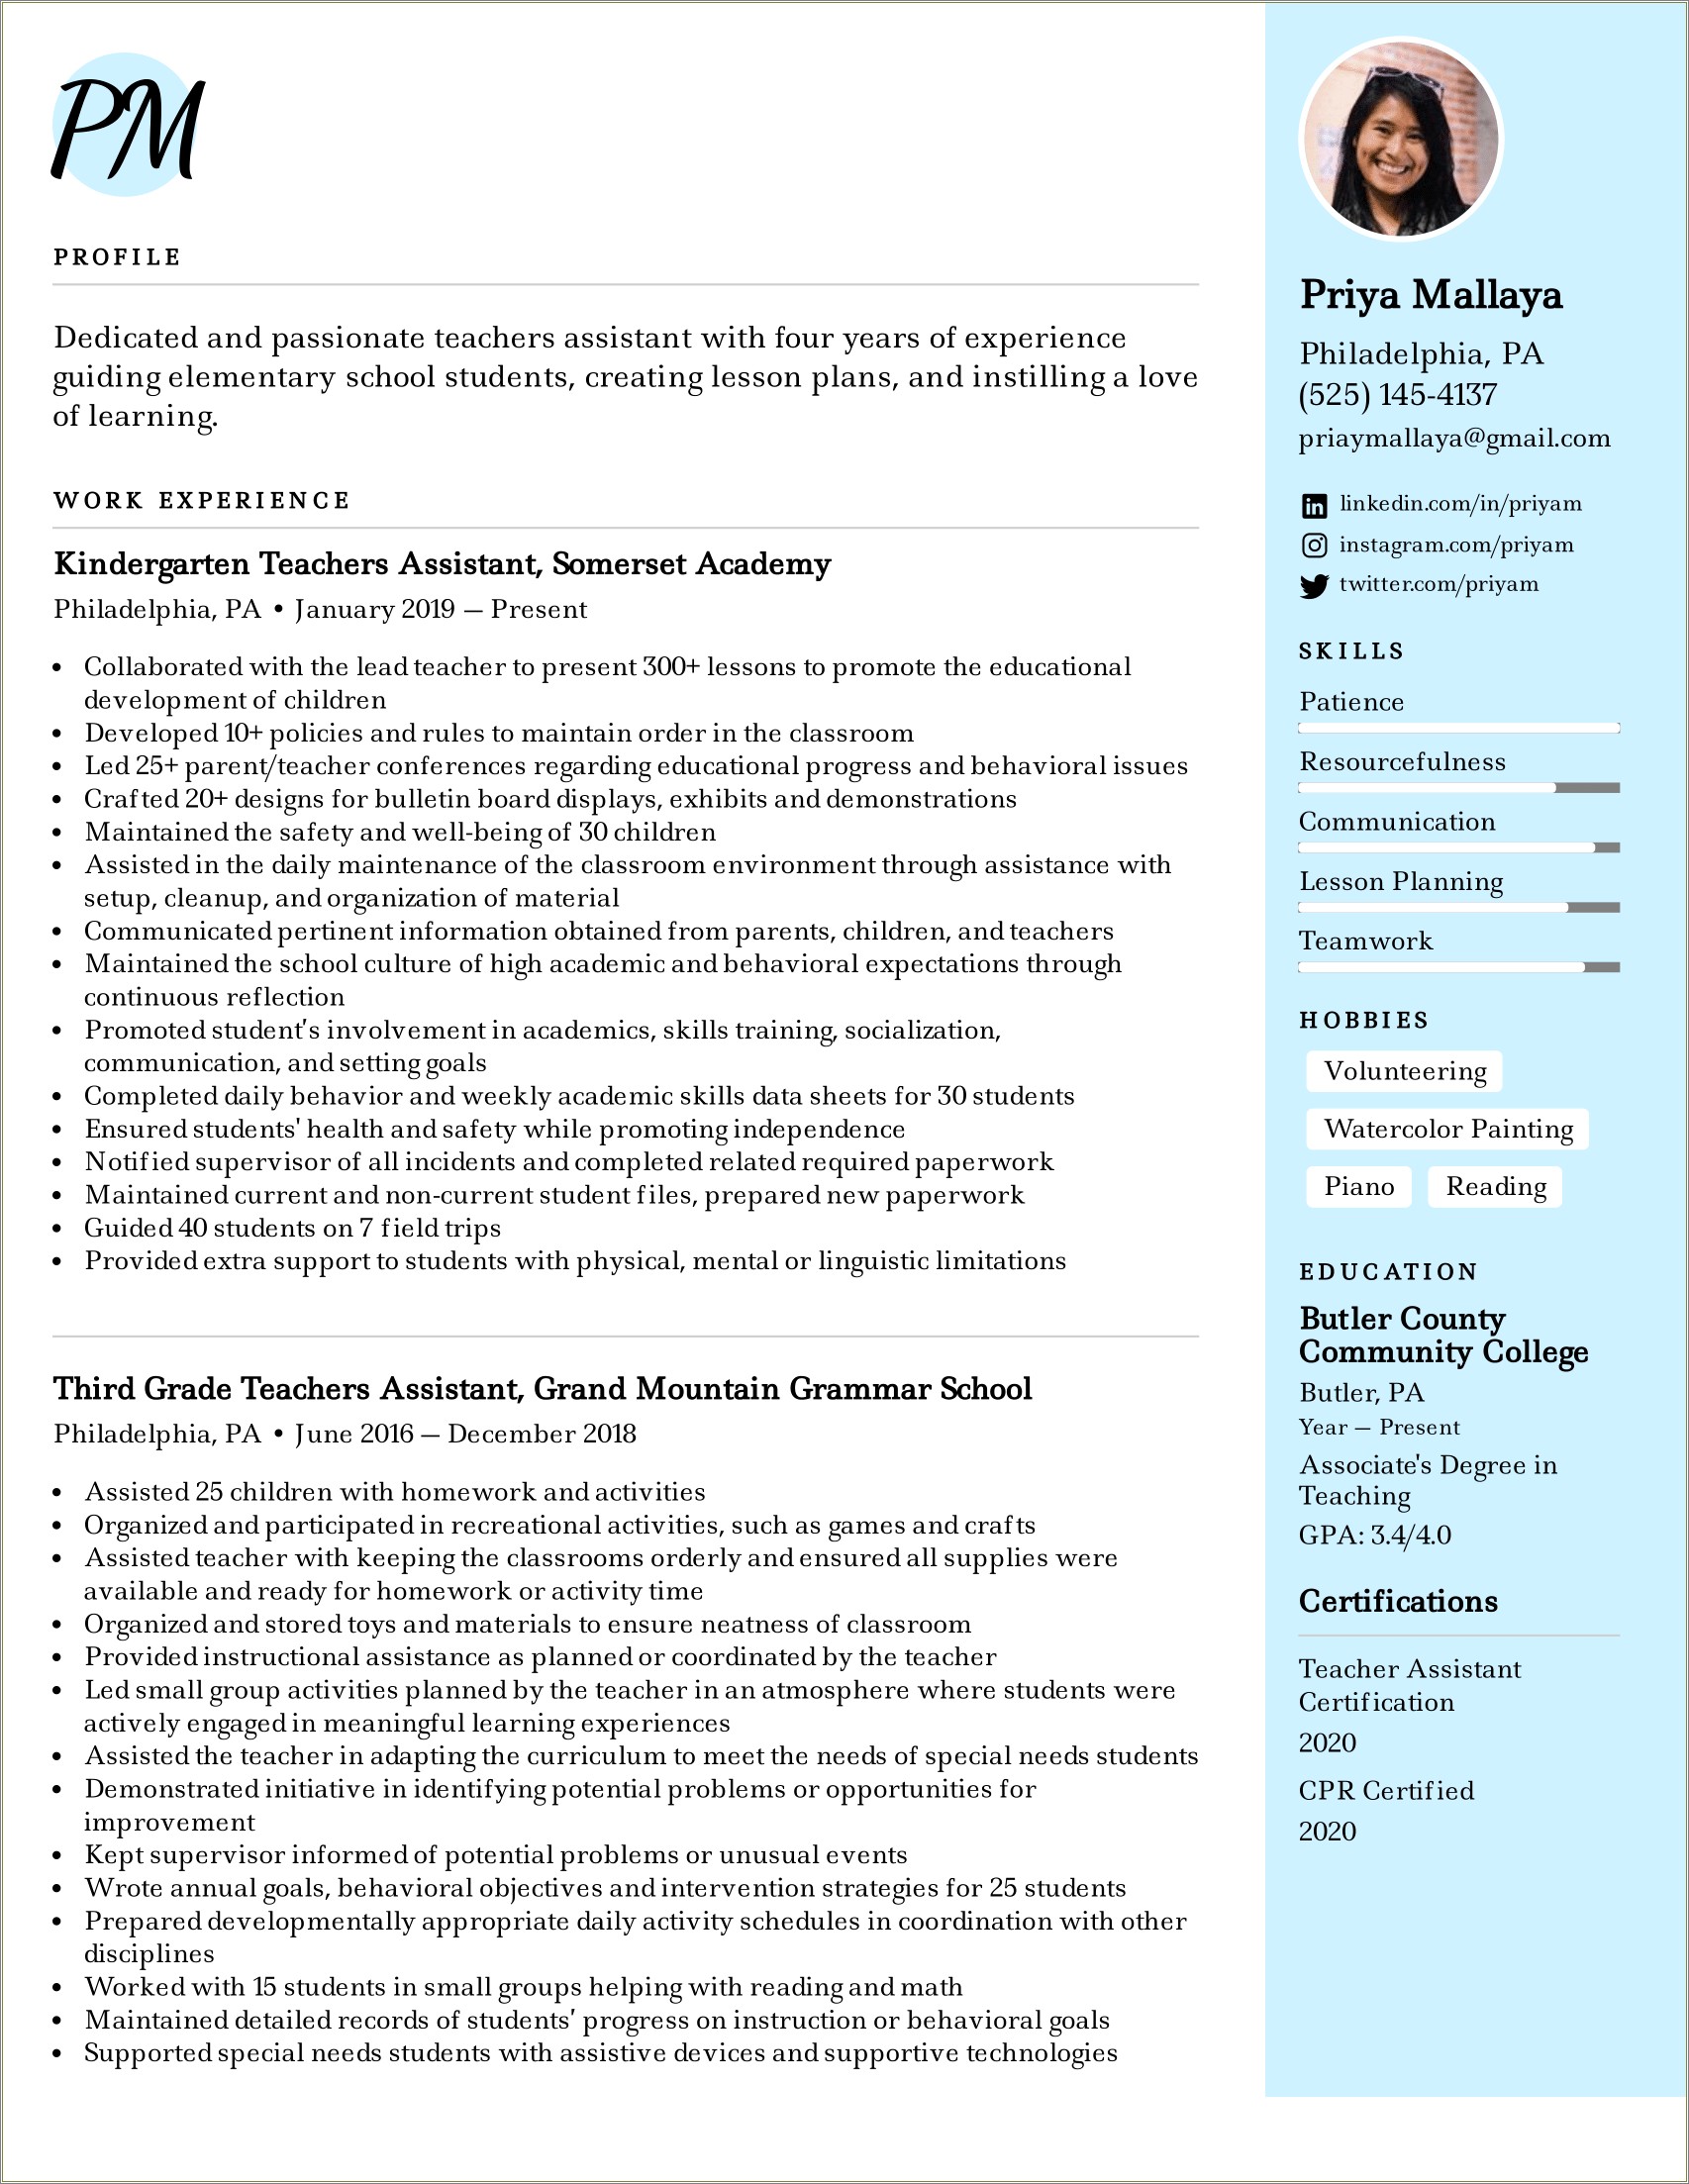 Resume And Listing Classroom Management In A Resume